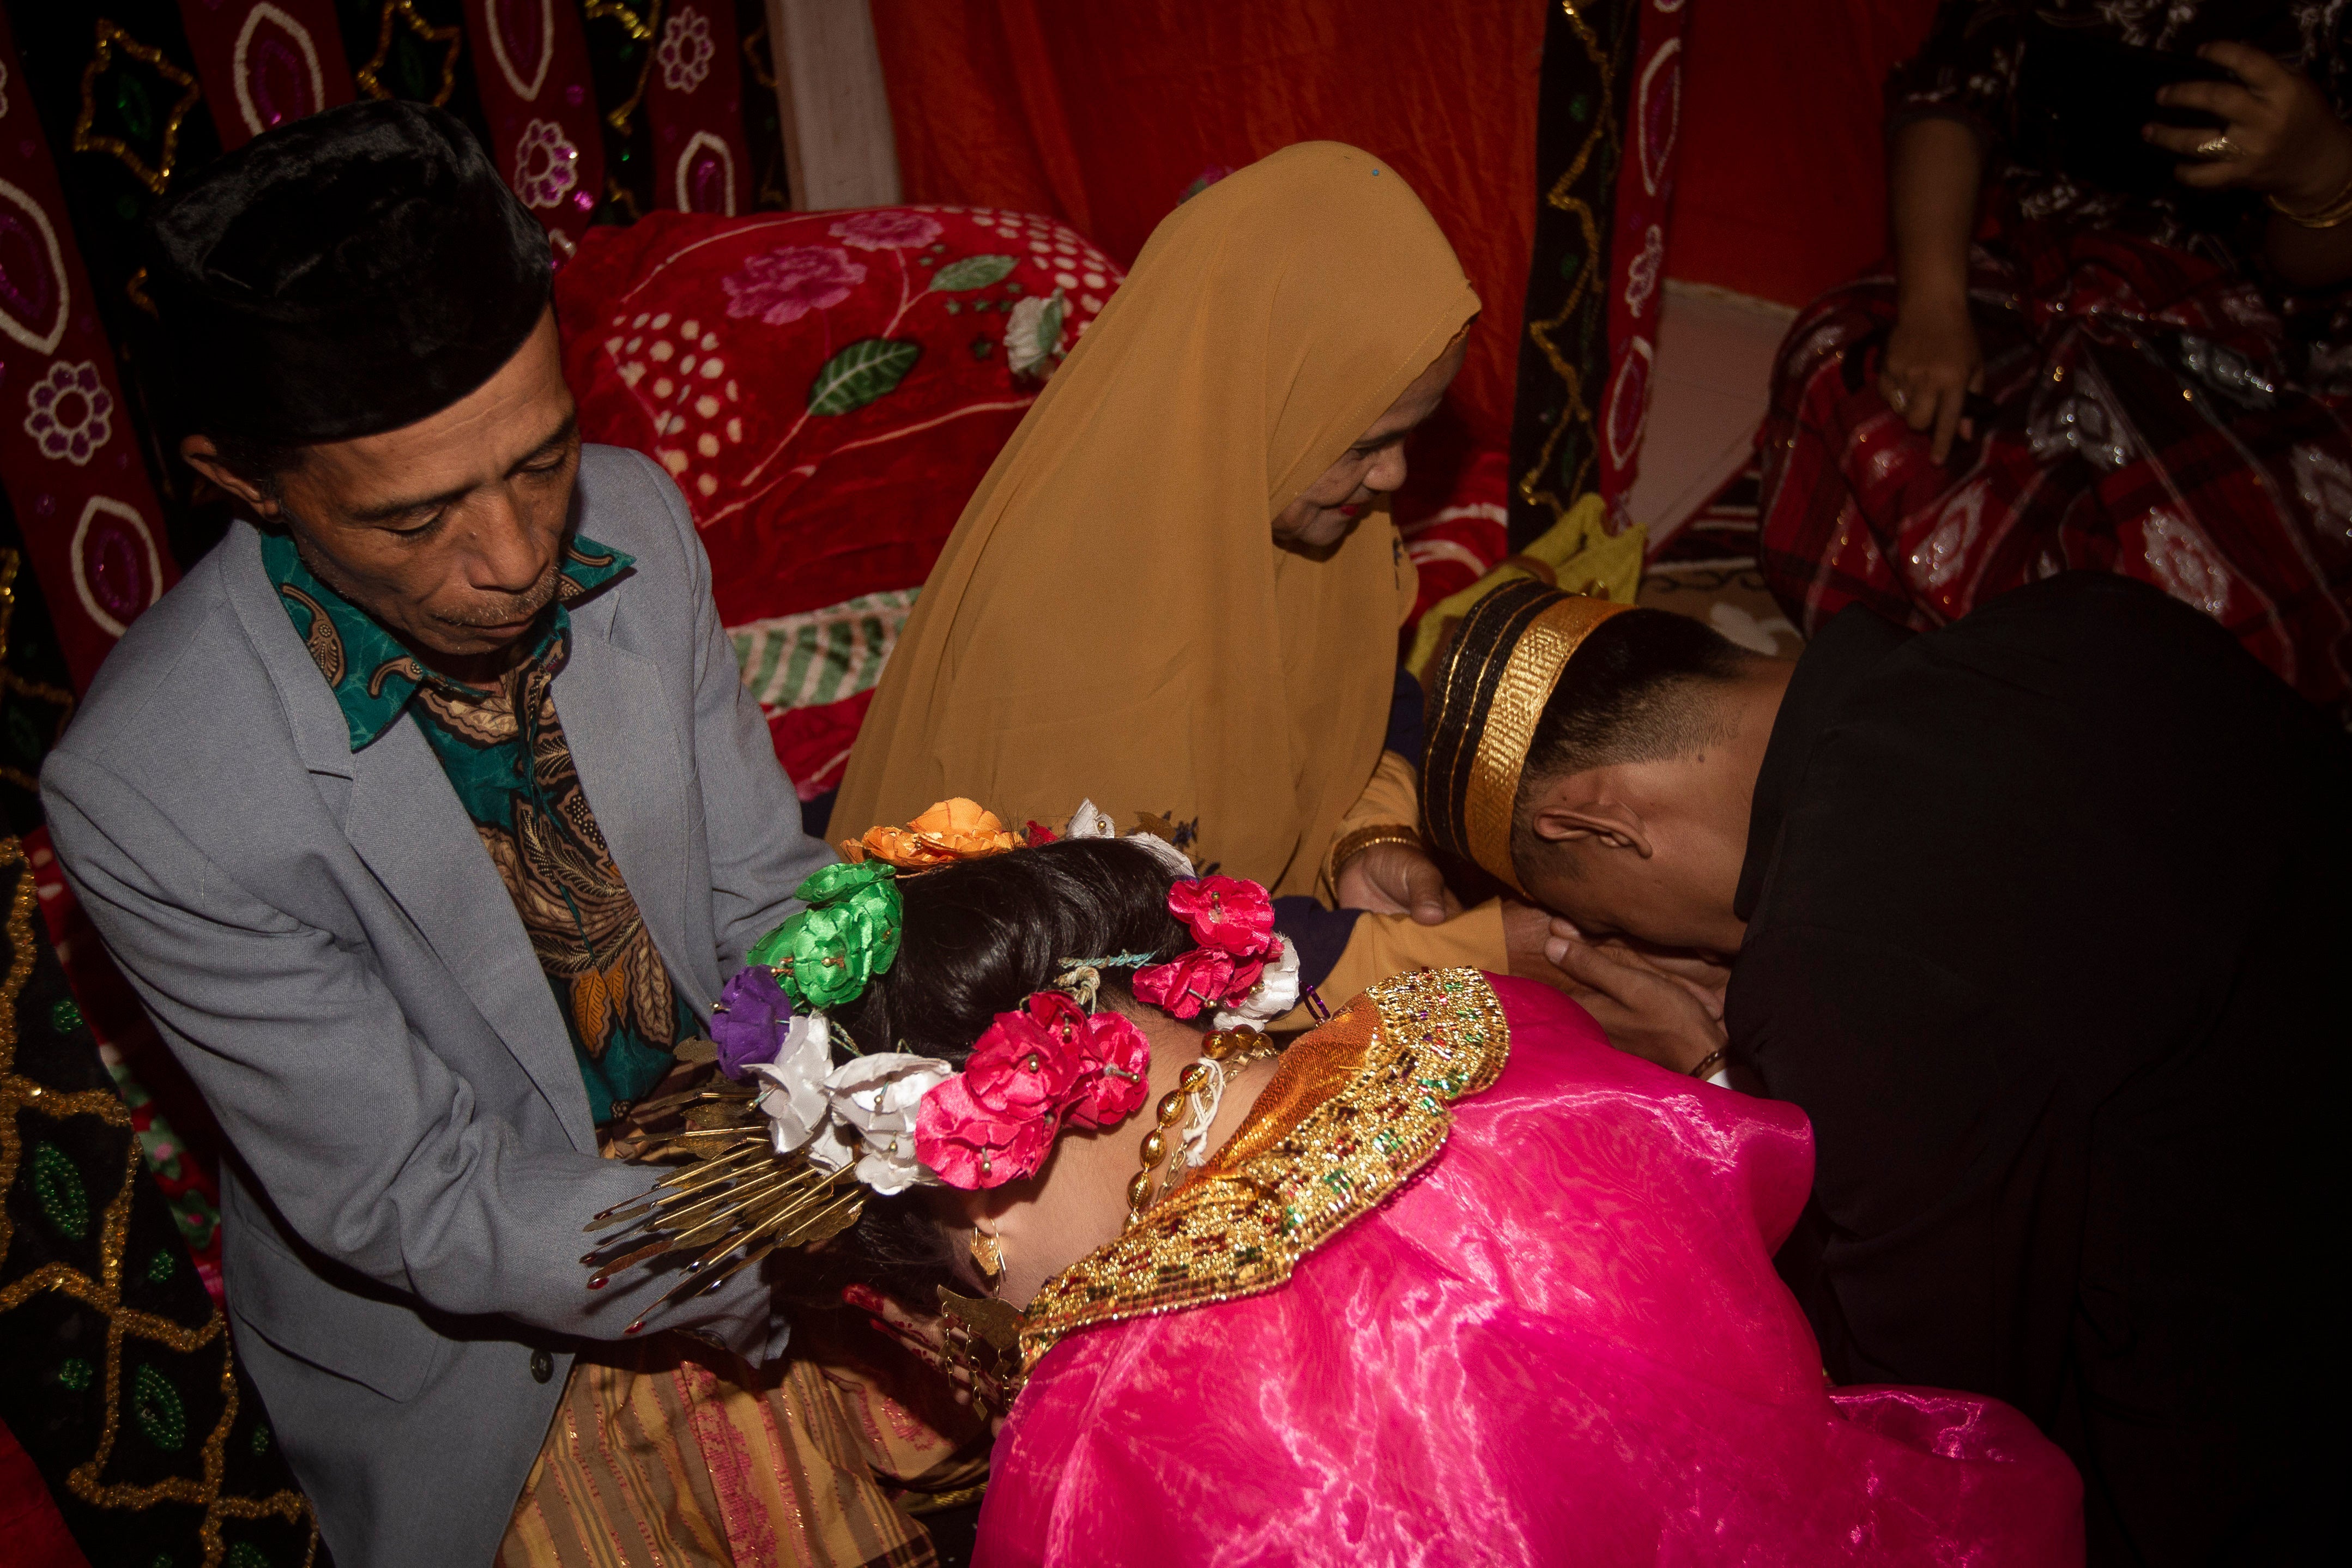 This picture taken on July 25, 2020 shows 18-year-old Lia (C) and her 21-year-old husband Randi (R, not their real names) asking for their parents’ blessing after getting married in the village of Tampapadang in Mamuju, West Sulawesi.